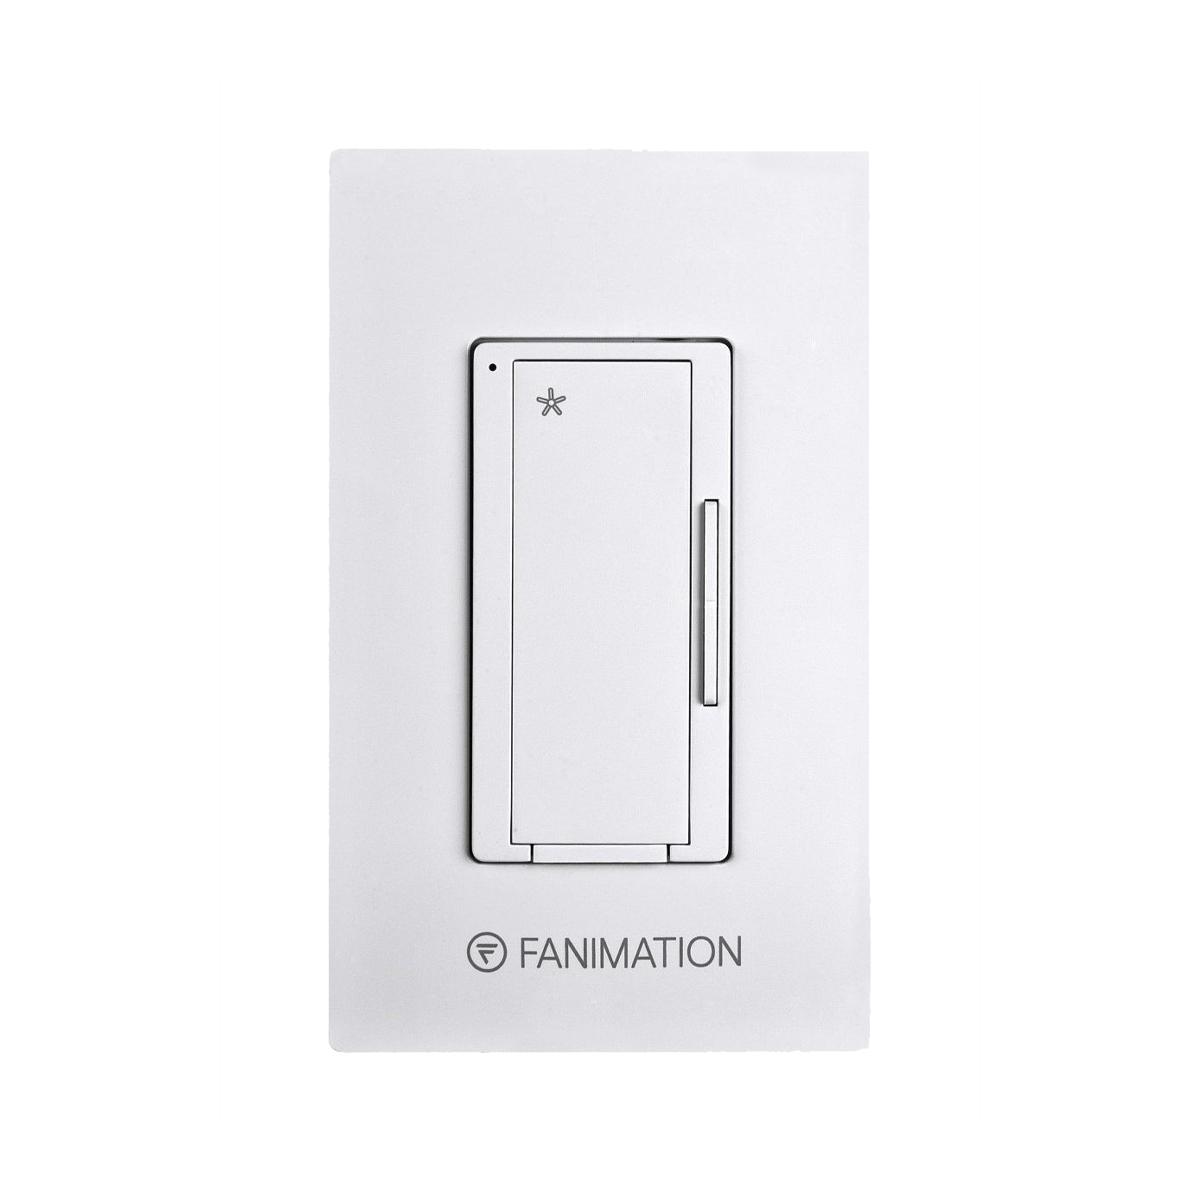 3-Speed Ceiling Fan Wall Control, White Finish